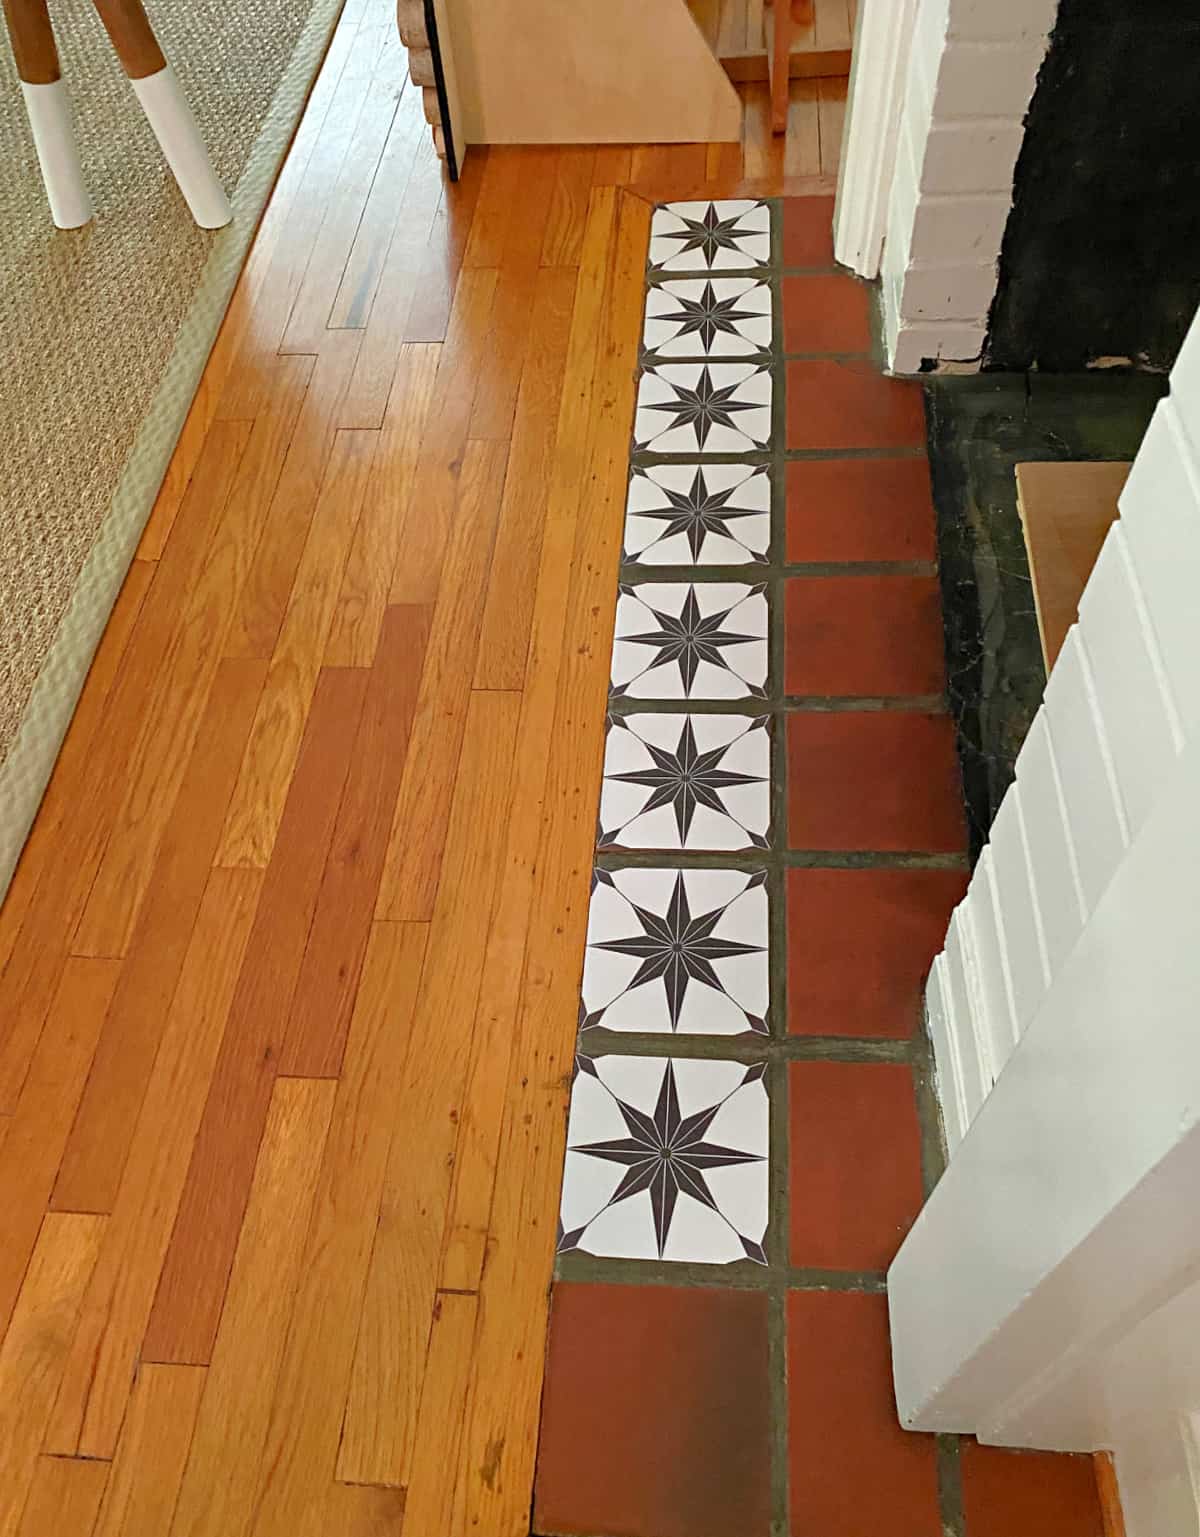 vinyl tile stickers on fireplace hearth